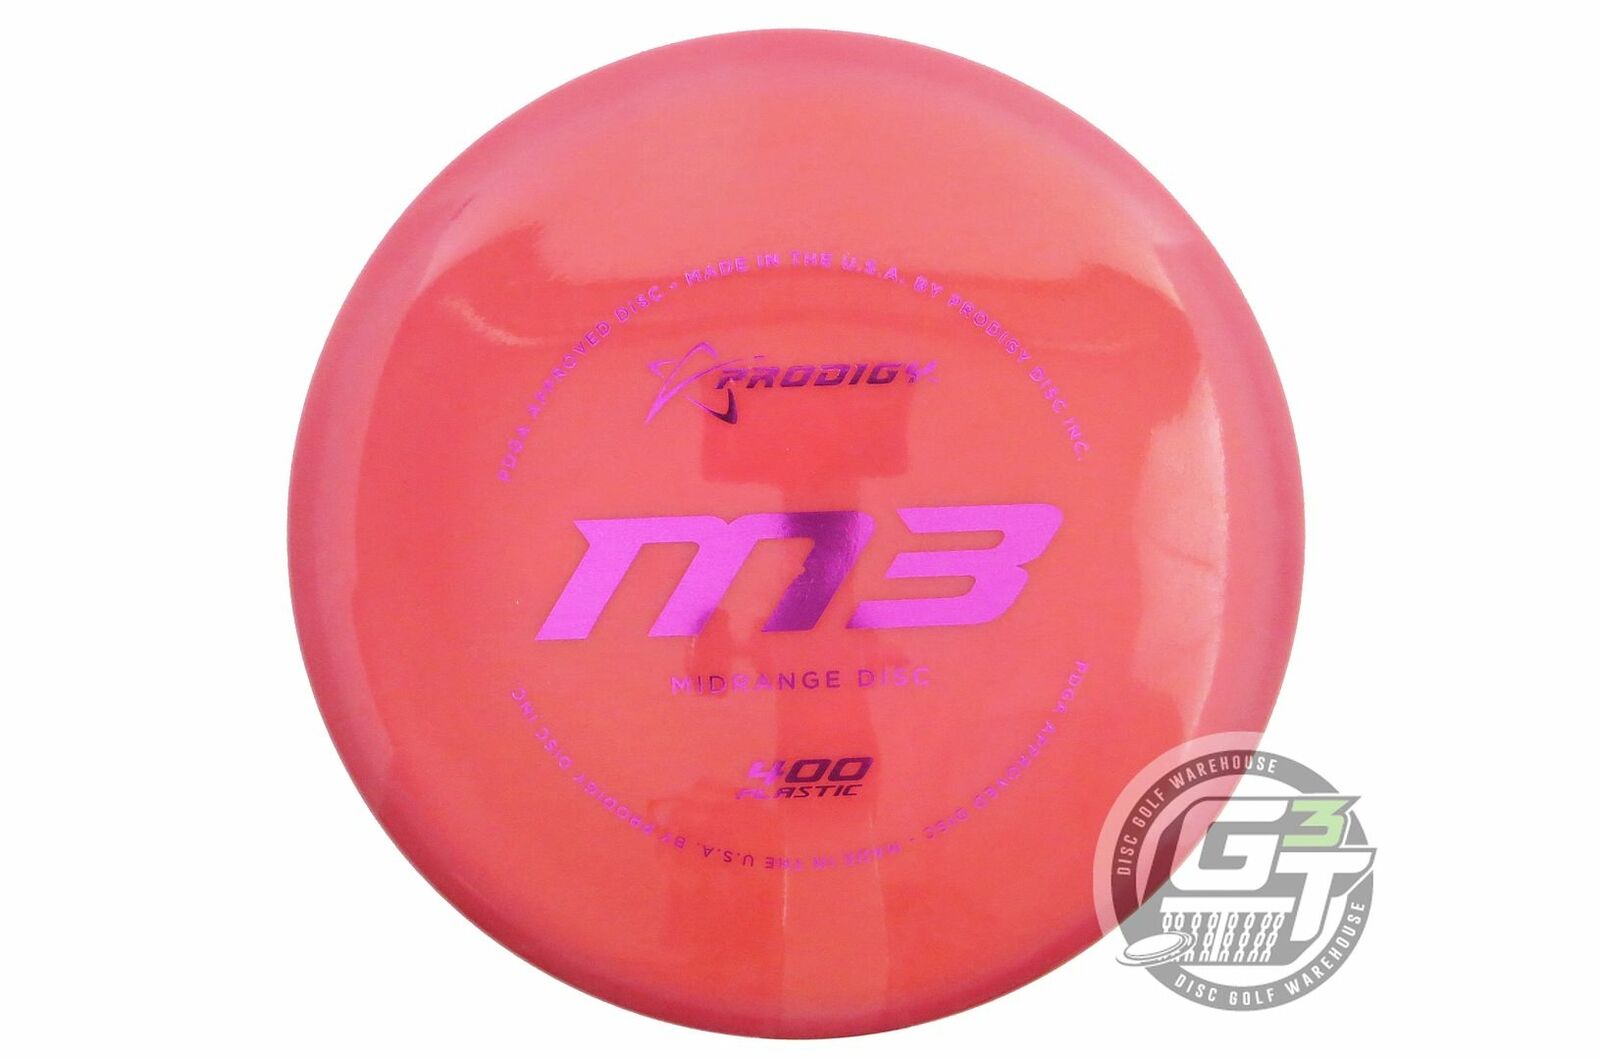 Prodigy 400 Series M3 Midrange Golf Disc (Individually Listed)